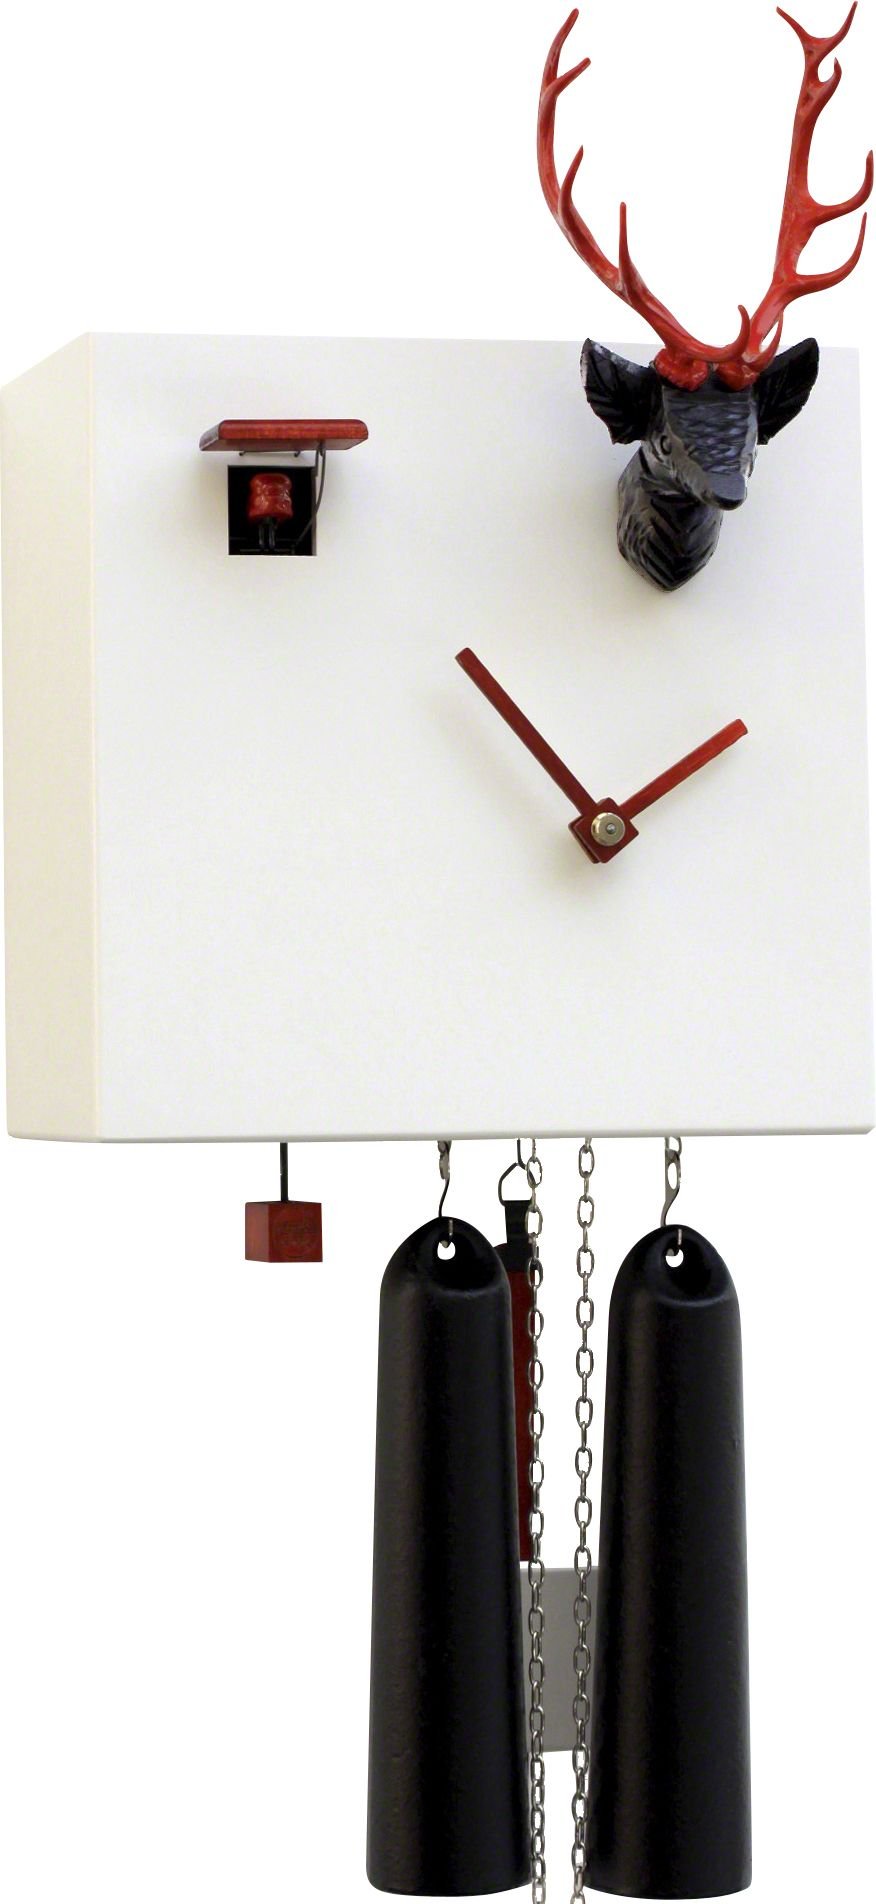 Cuckoo Clock Modern Art Style 8 Day Movement 30cm by Rombach & Haas